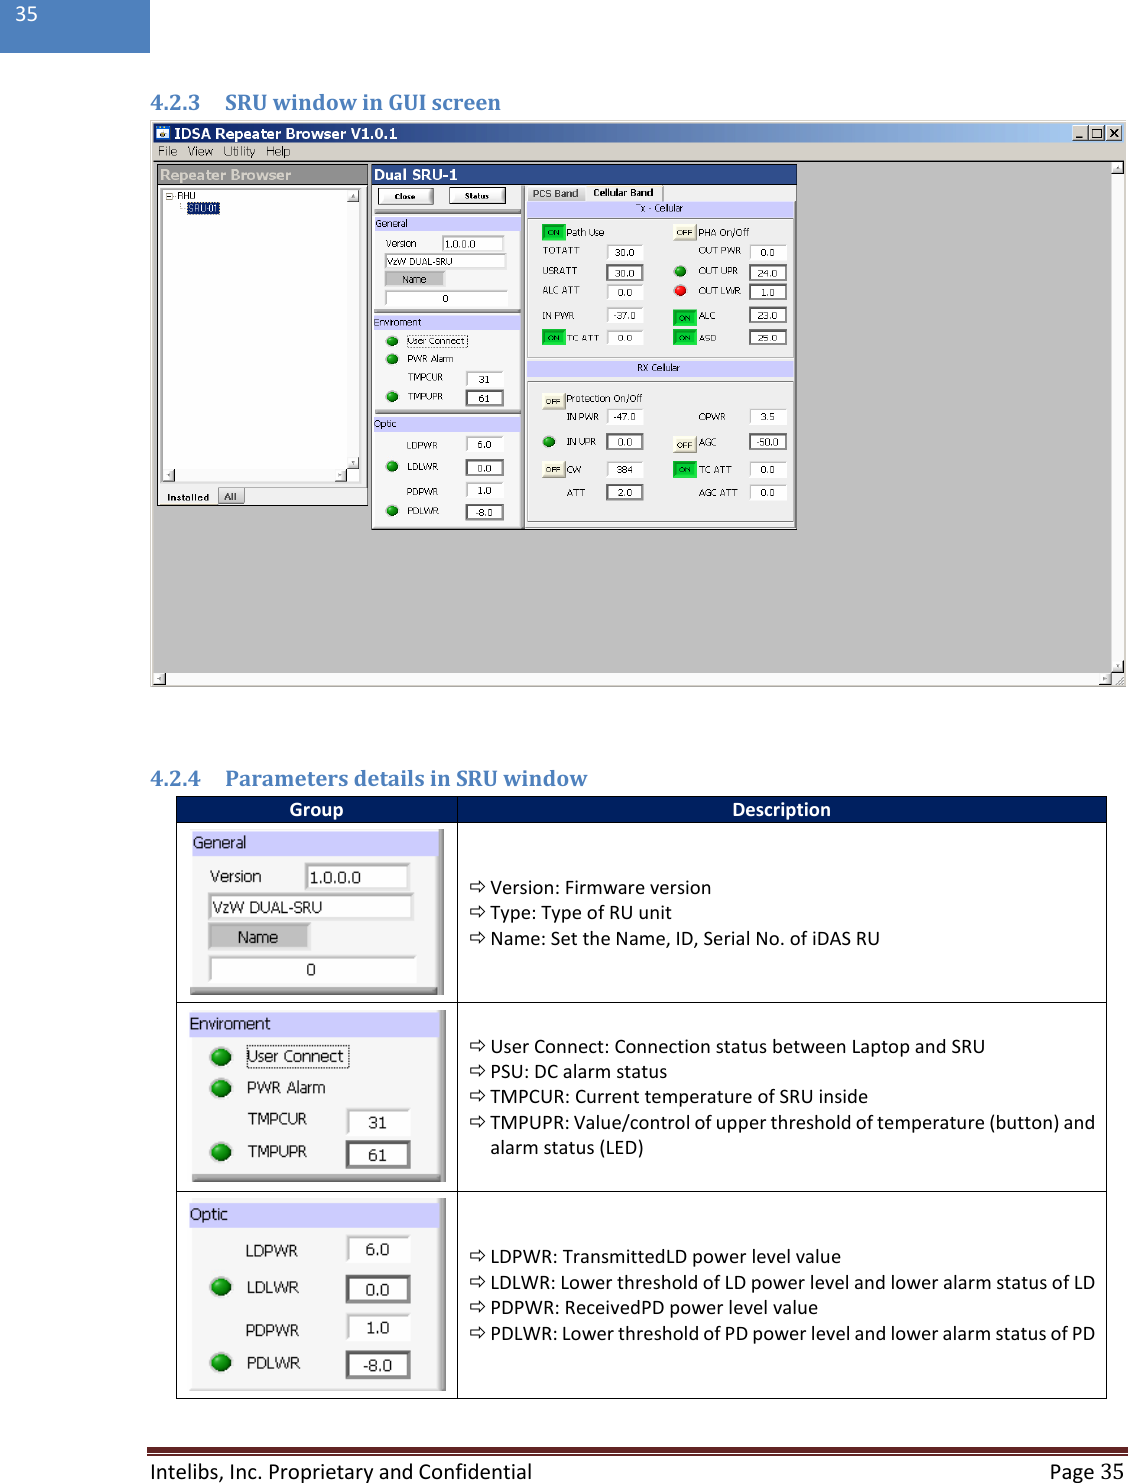  Intelibs, Inc. Proprietary and Confidential   Page 35  35  4.2.3 SRU window in GUI screen   4.2.4 Parameters details in SRU window Group Description   Version: Firmware version  Type: Type of RU unit  Name: Set the Name, ID, Serial No. of iDAS RU   User Connect: Connection status between Laptop and SRU  PSU: DC alarm status  TMPCUR: Current temperature of SRU inside  TMPUPR: Value/control of upper threshold of temperature (button) and alarm status (LED)   LDPWR: TransmittedLD power level value  LDLWR: Lower threshold of LD power level and lower alarm status of LD  PDPWR: ReceivedPD power level value  PDLWR: Lower threshold of PD power level and lower alarm status of PD 